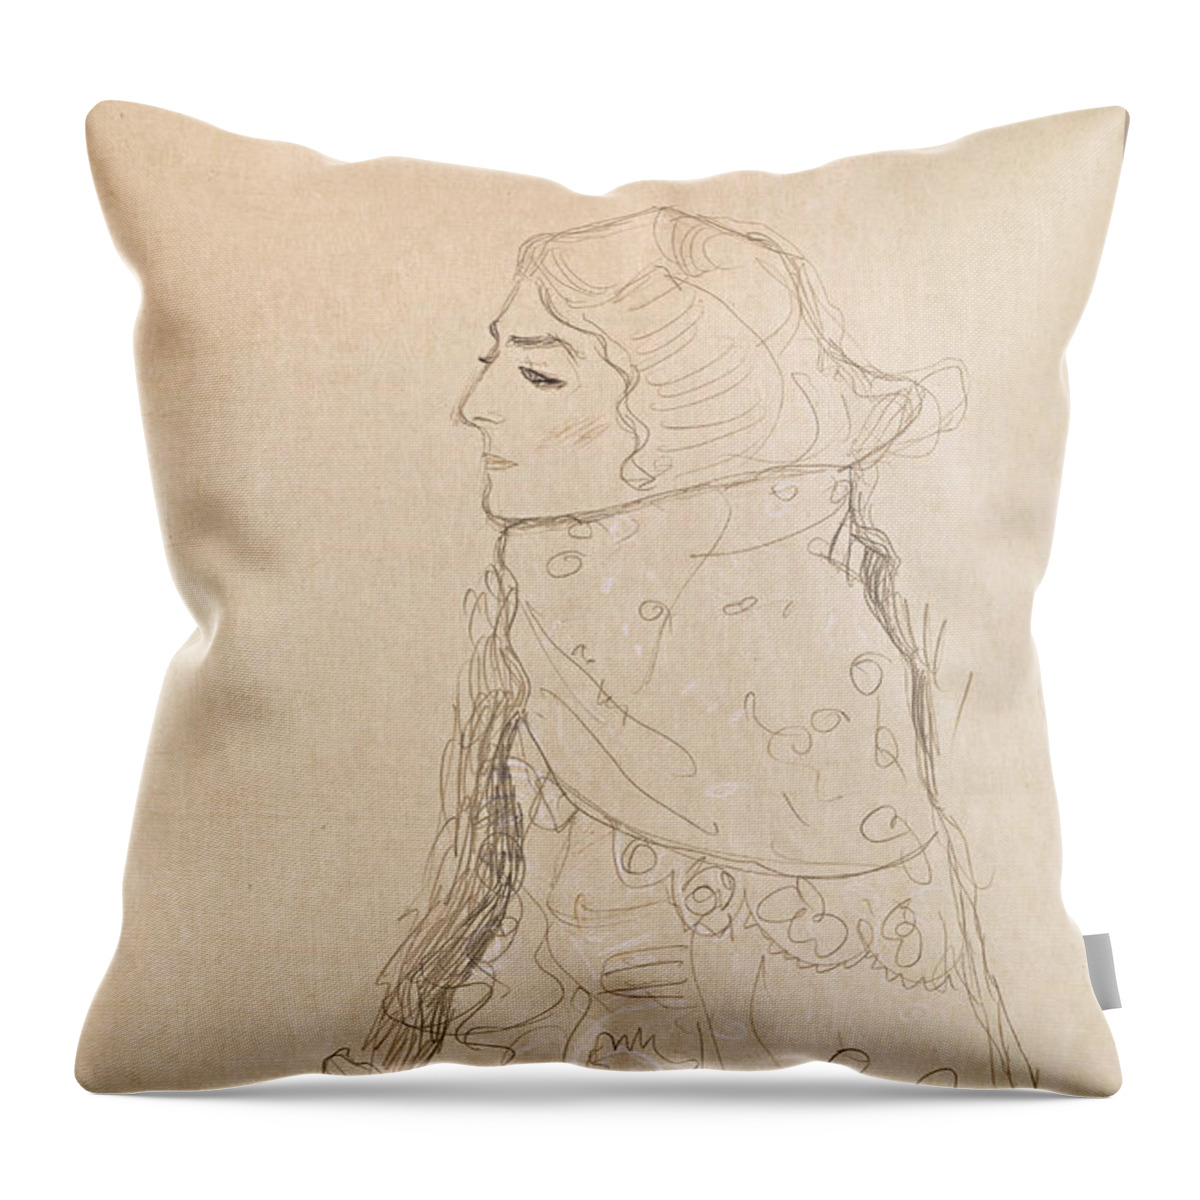 Klimt Throw Pillow featuring the drawing Seated Woman by Gustav Klimt